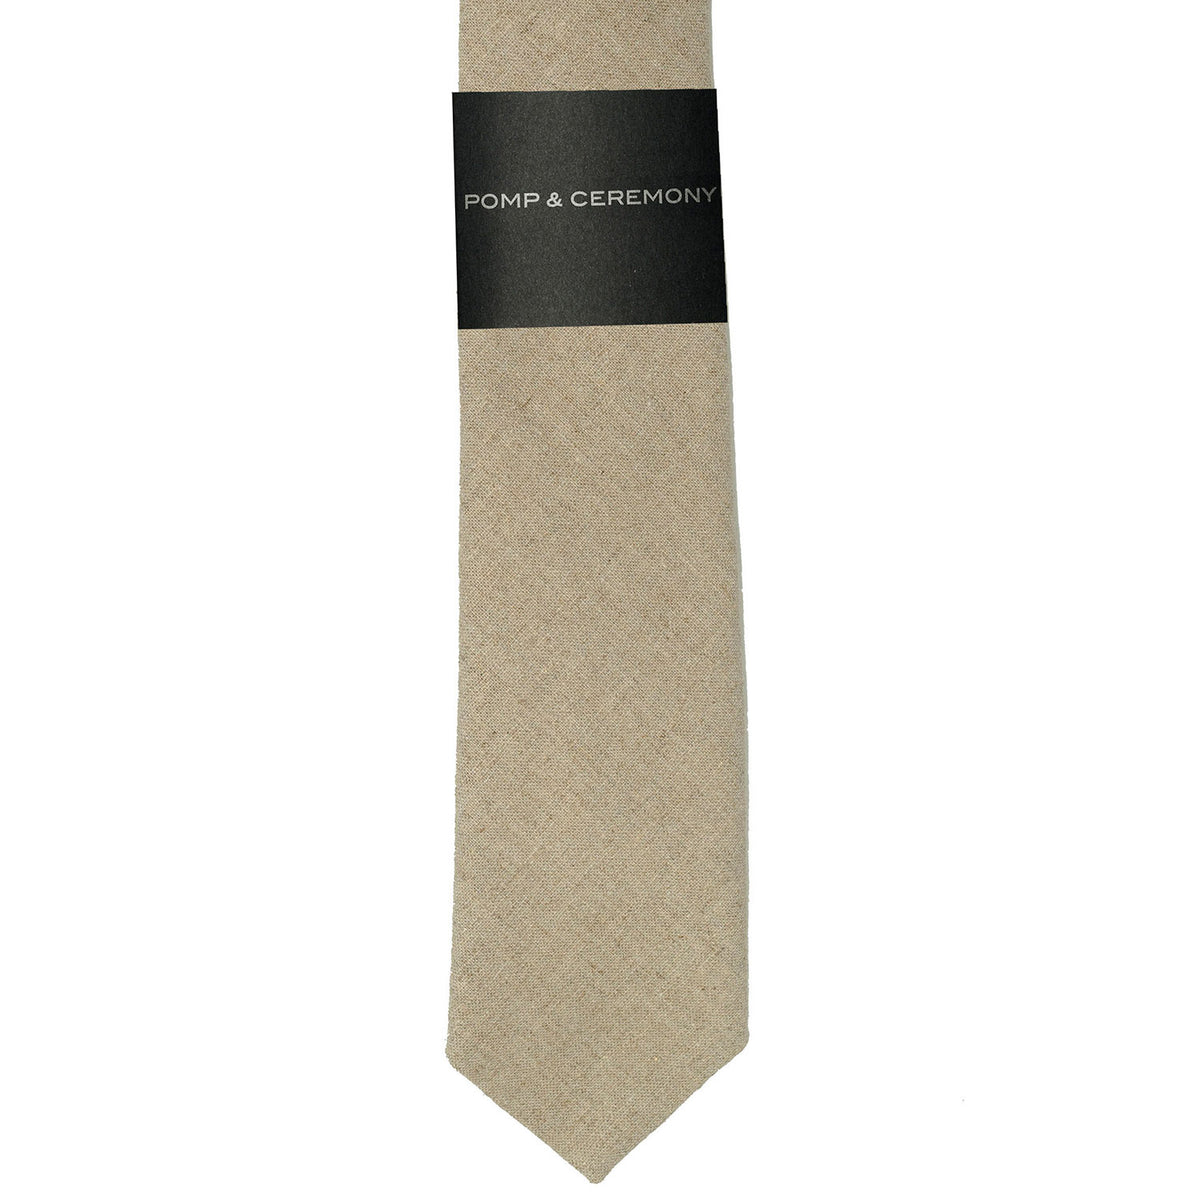 Liberty of London Natural Linen Tie